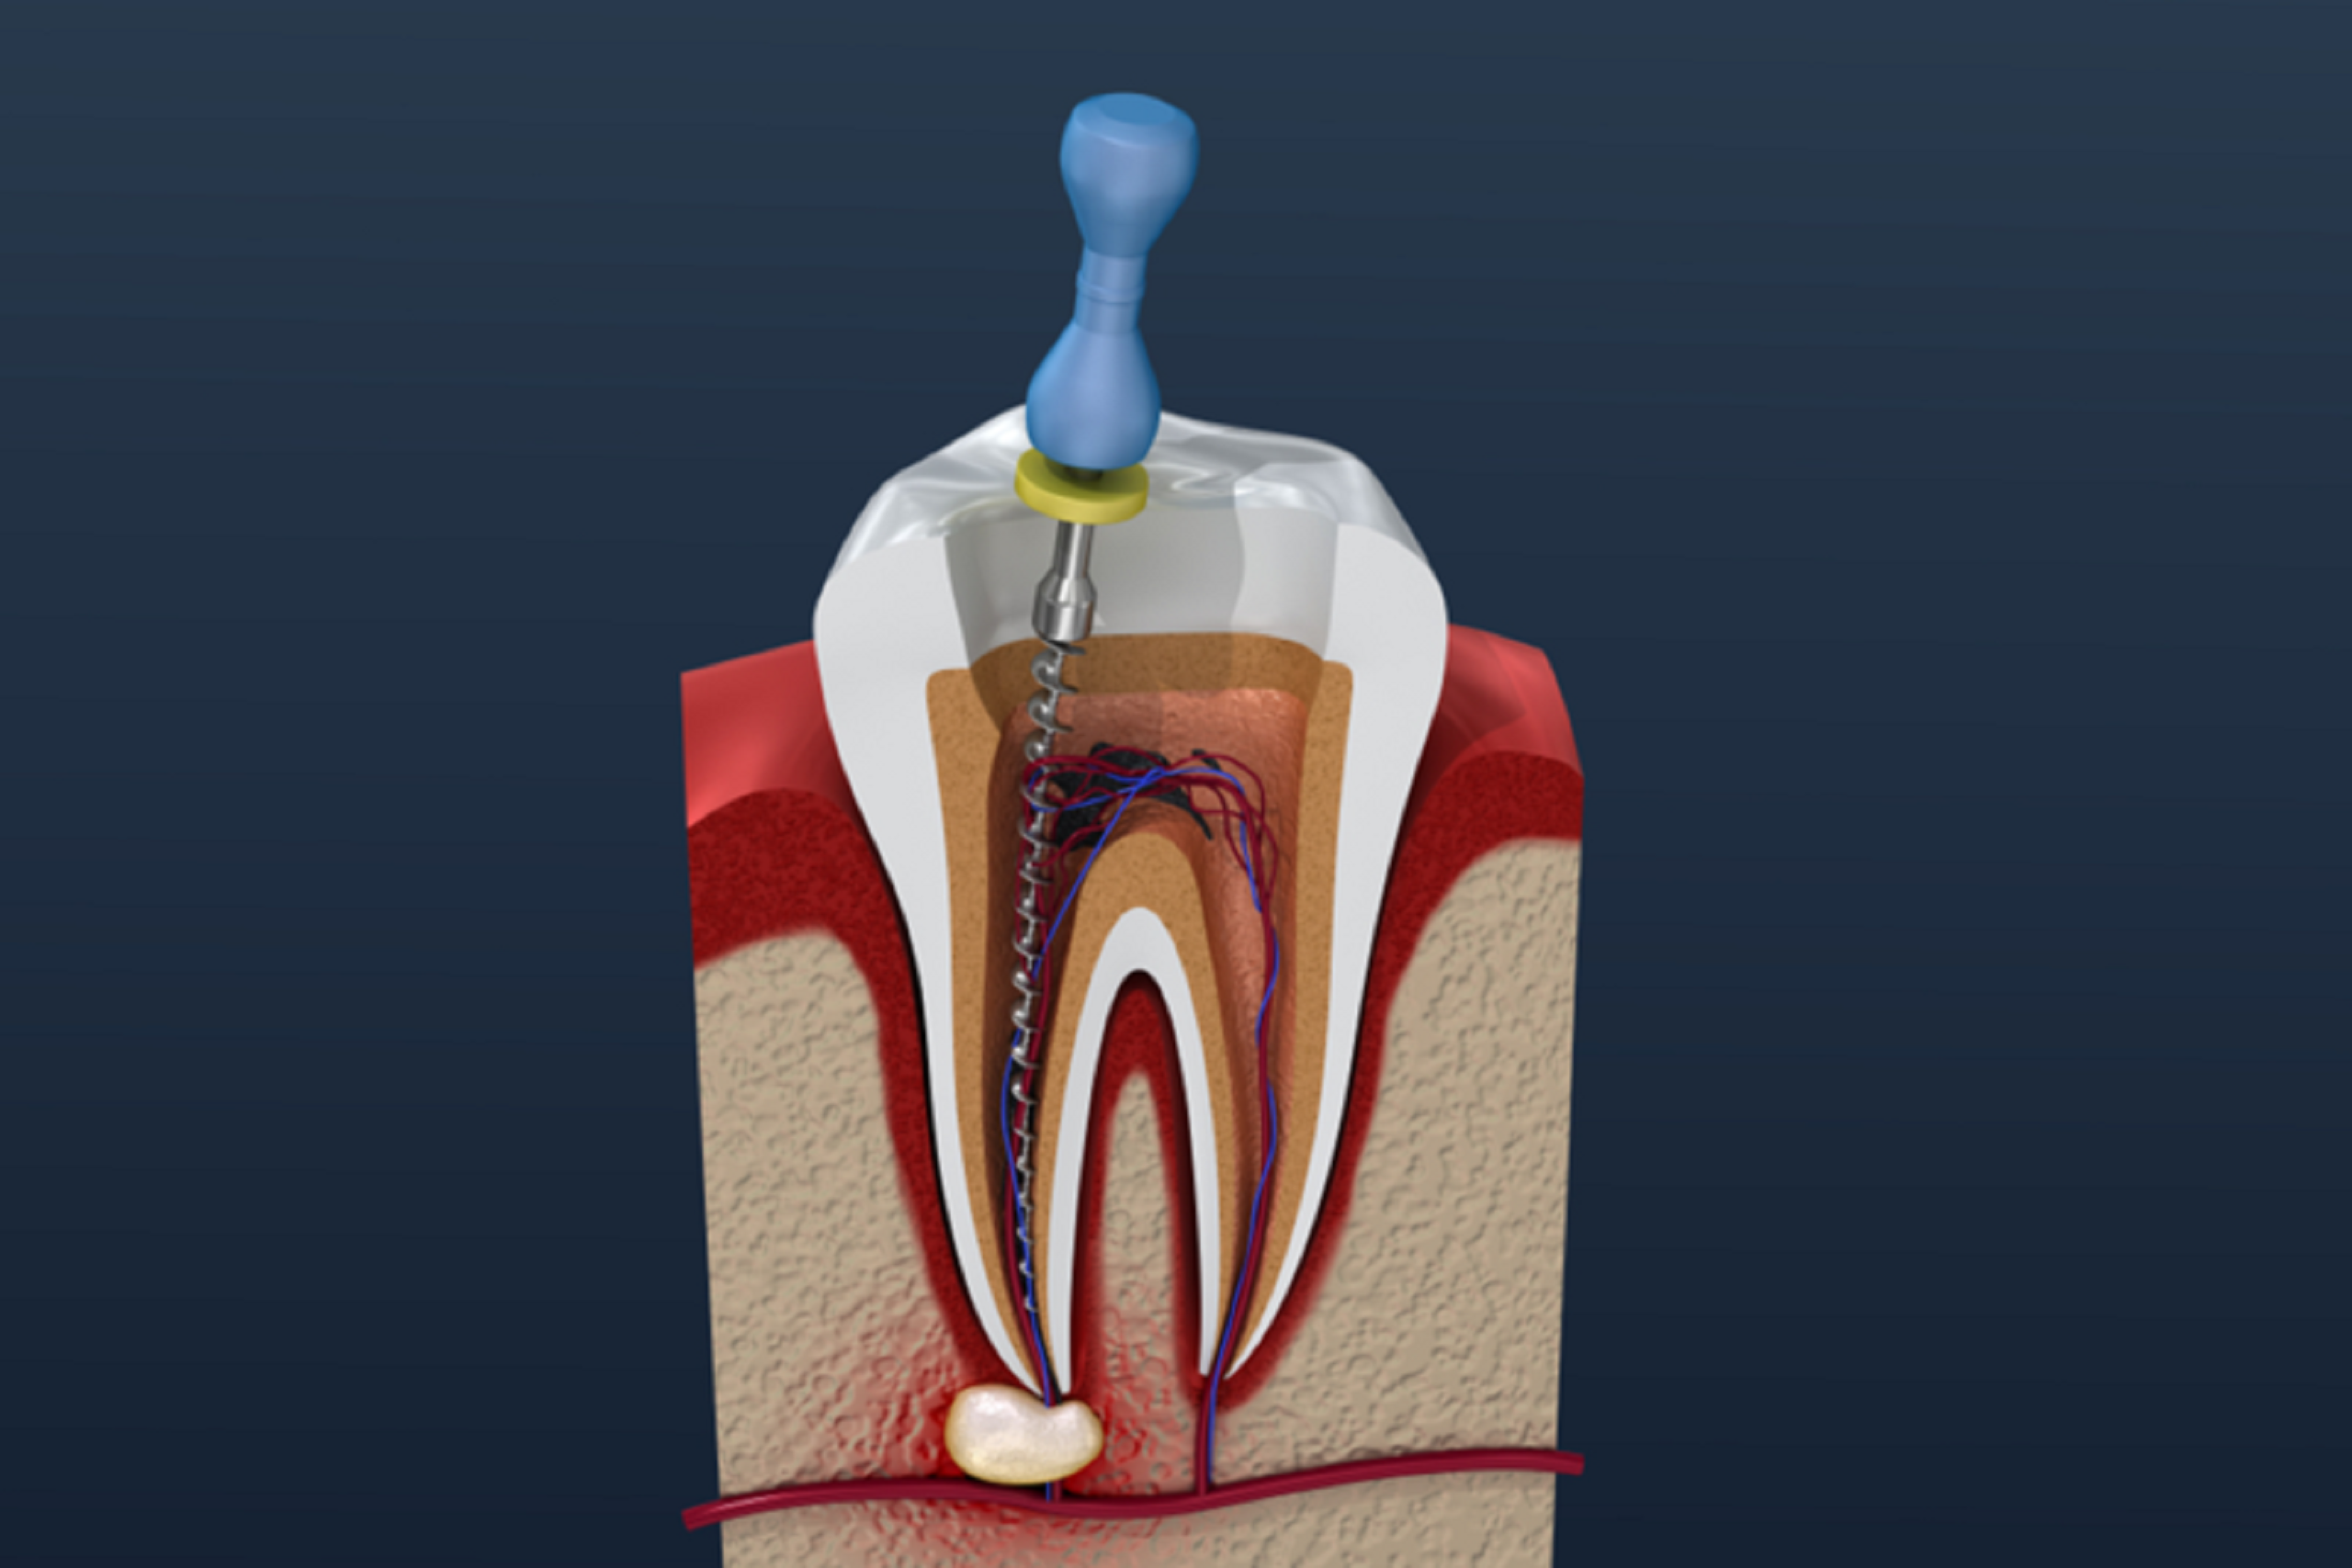 Root Canal Treatment in Blackfalds near Red Deer